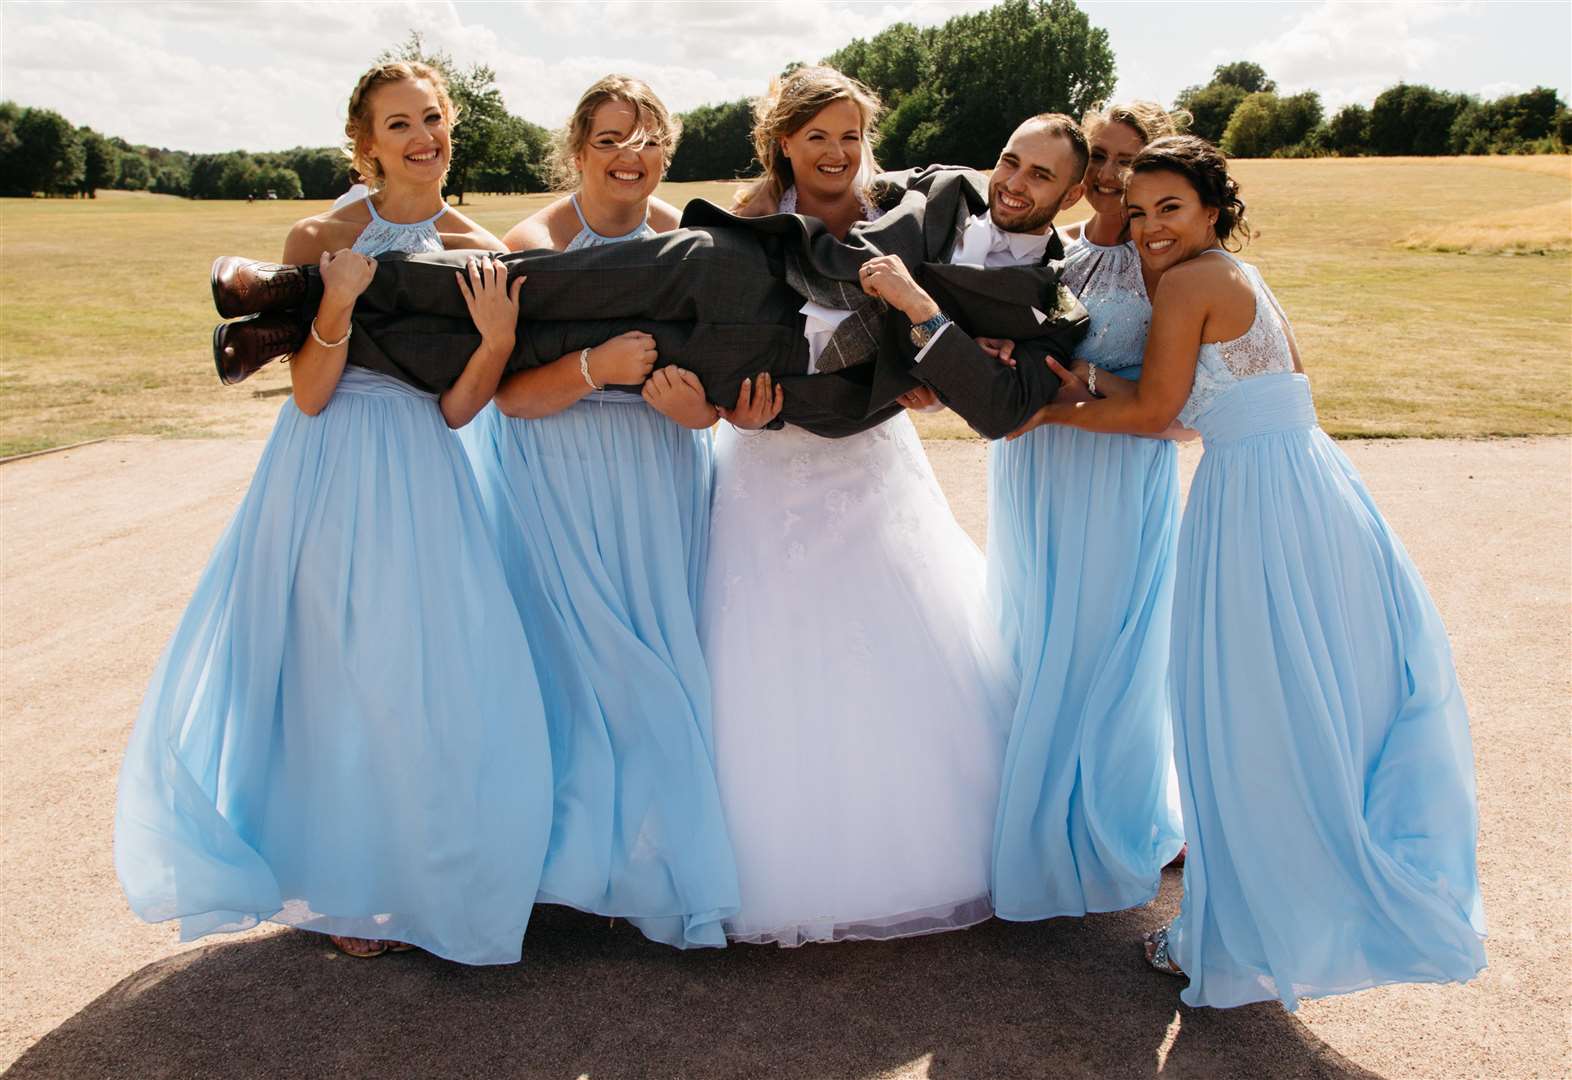 The bridesmaids always knew Stan was head over heels for Holly